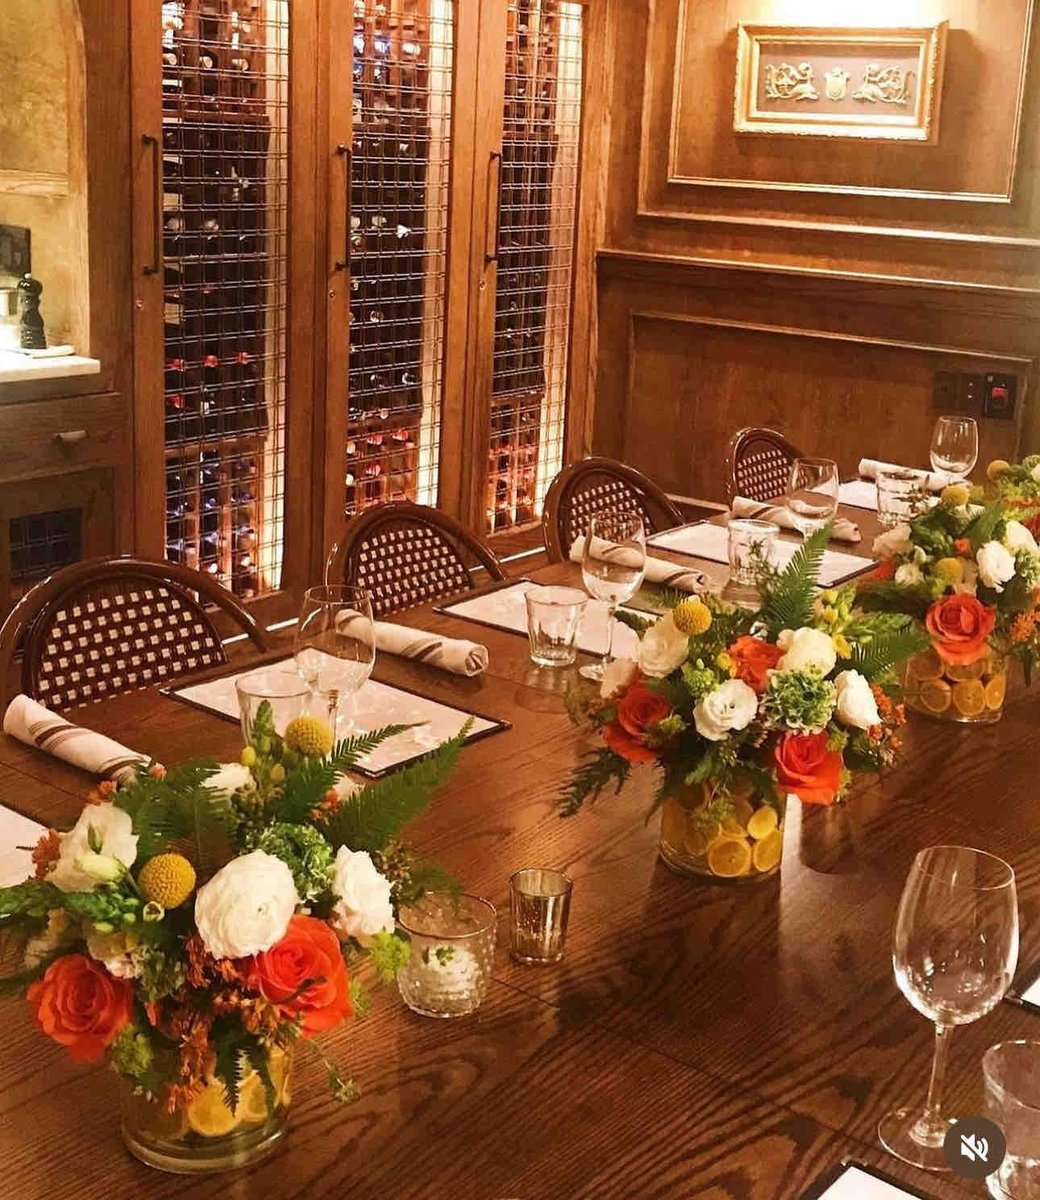 Birthdays, anniversaries, or a celebratory graduation dinner.
Our private dining room is the perfect place for a lovely evening with family & friends. 
Email our events director soiree@h2-collective.com for details 💕 
#ArlingtonVA